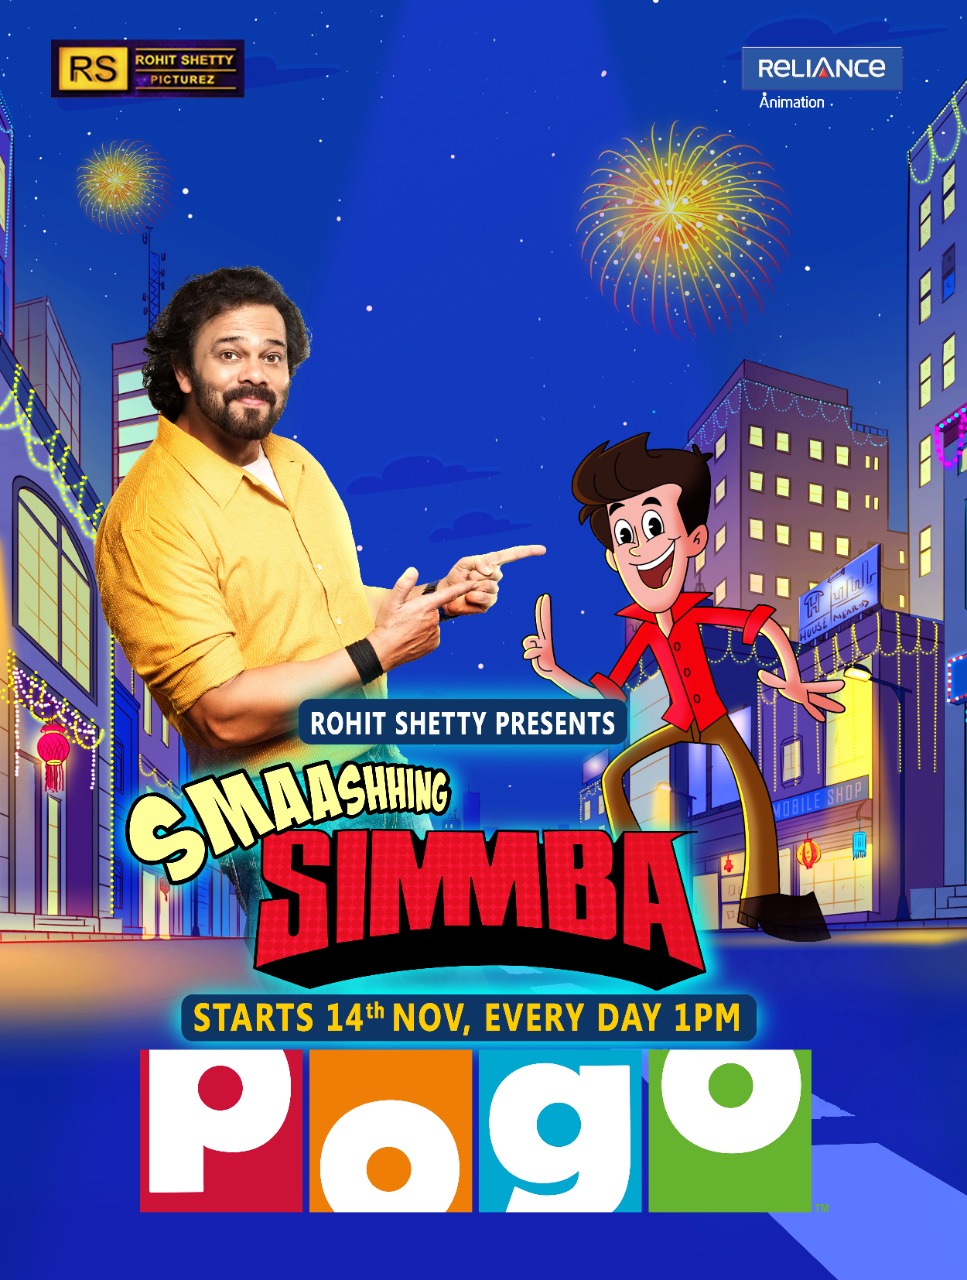 POGO IN ASSOCIATION WITH ROHIT SHETTY ANNOUNCES NEW ACTION-PACKED ANIMATION SERIES ‘SMASHING SIMMBA’ THIS DIWALI